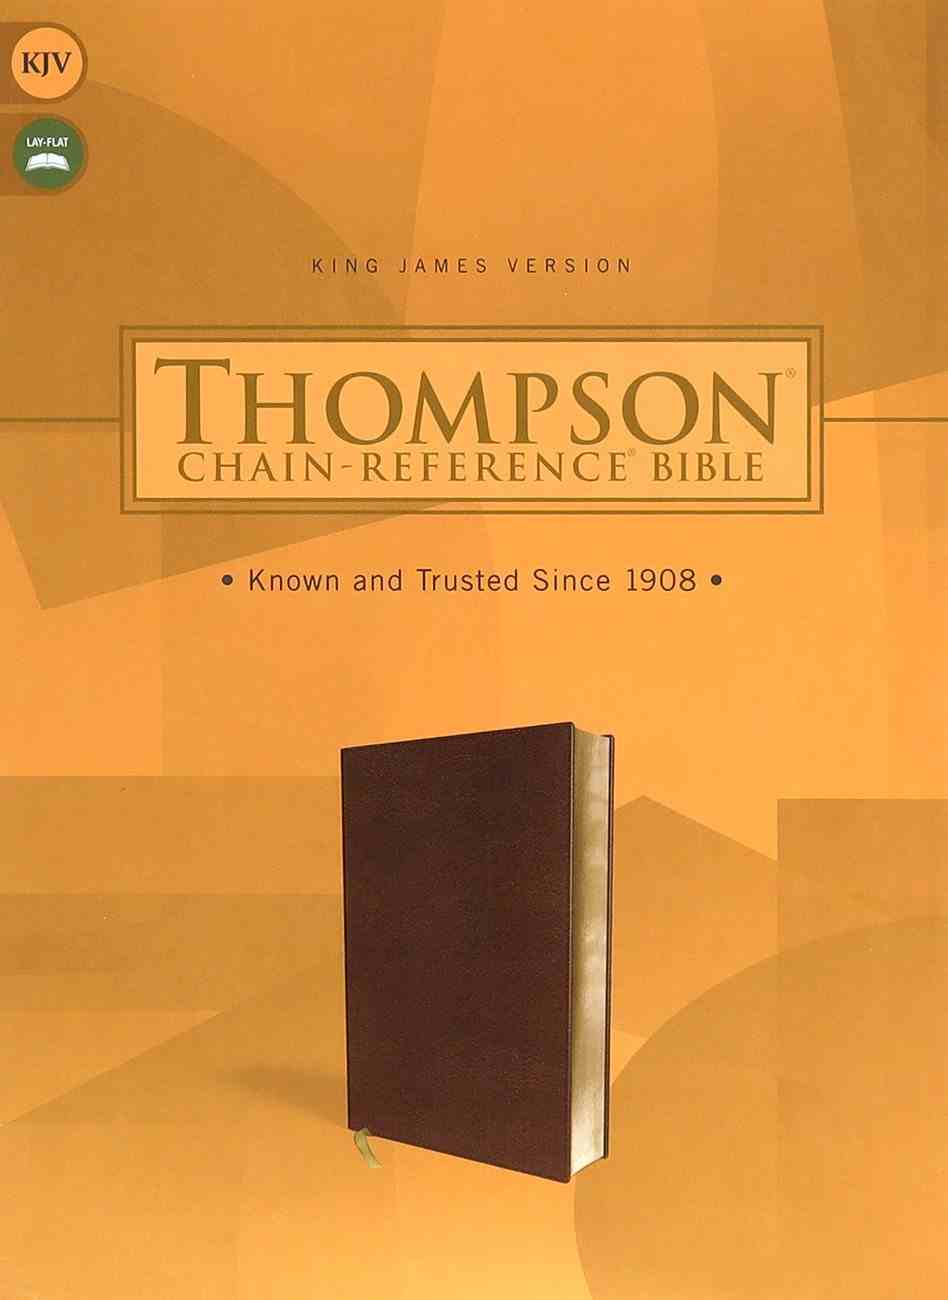 KJV Thompson Chain-Reference Bible Brown (Red Letter Edition) Premium Imitation Leather